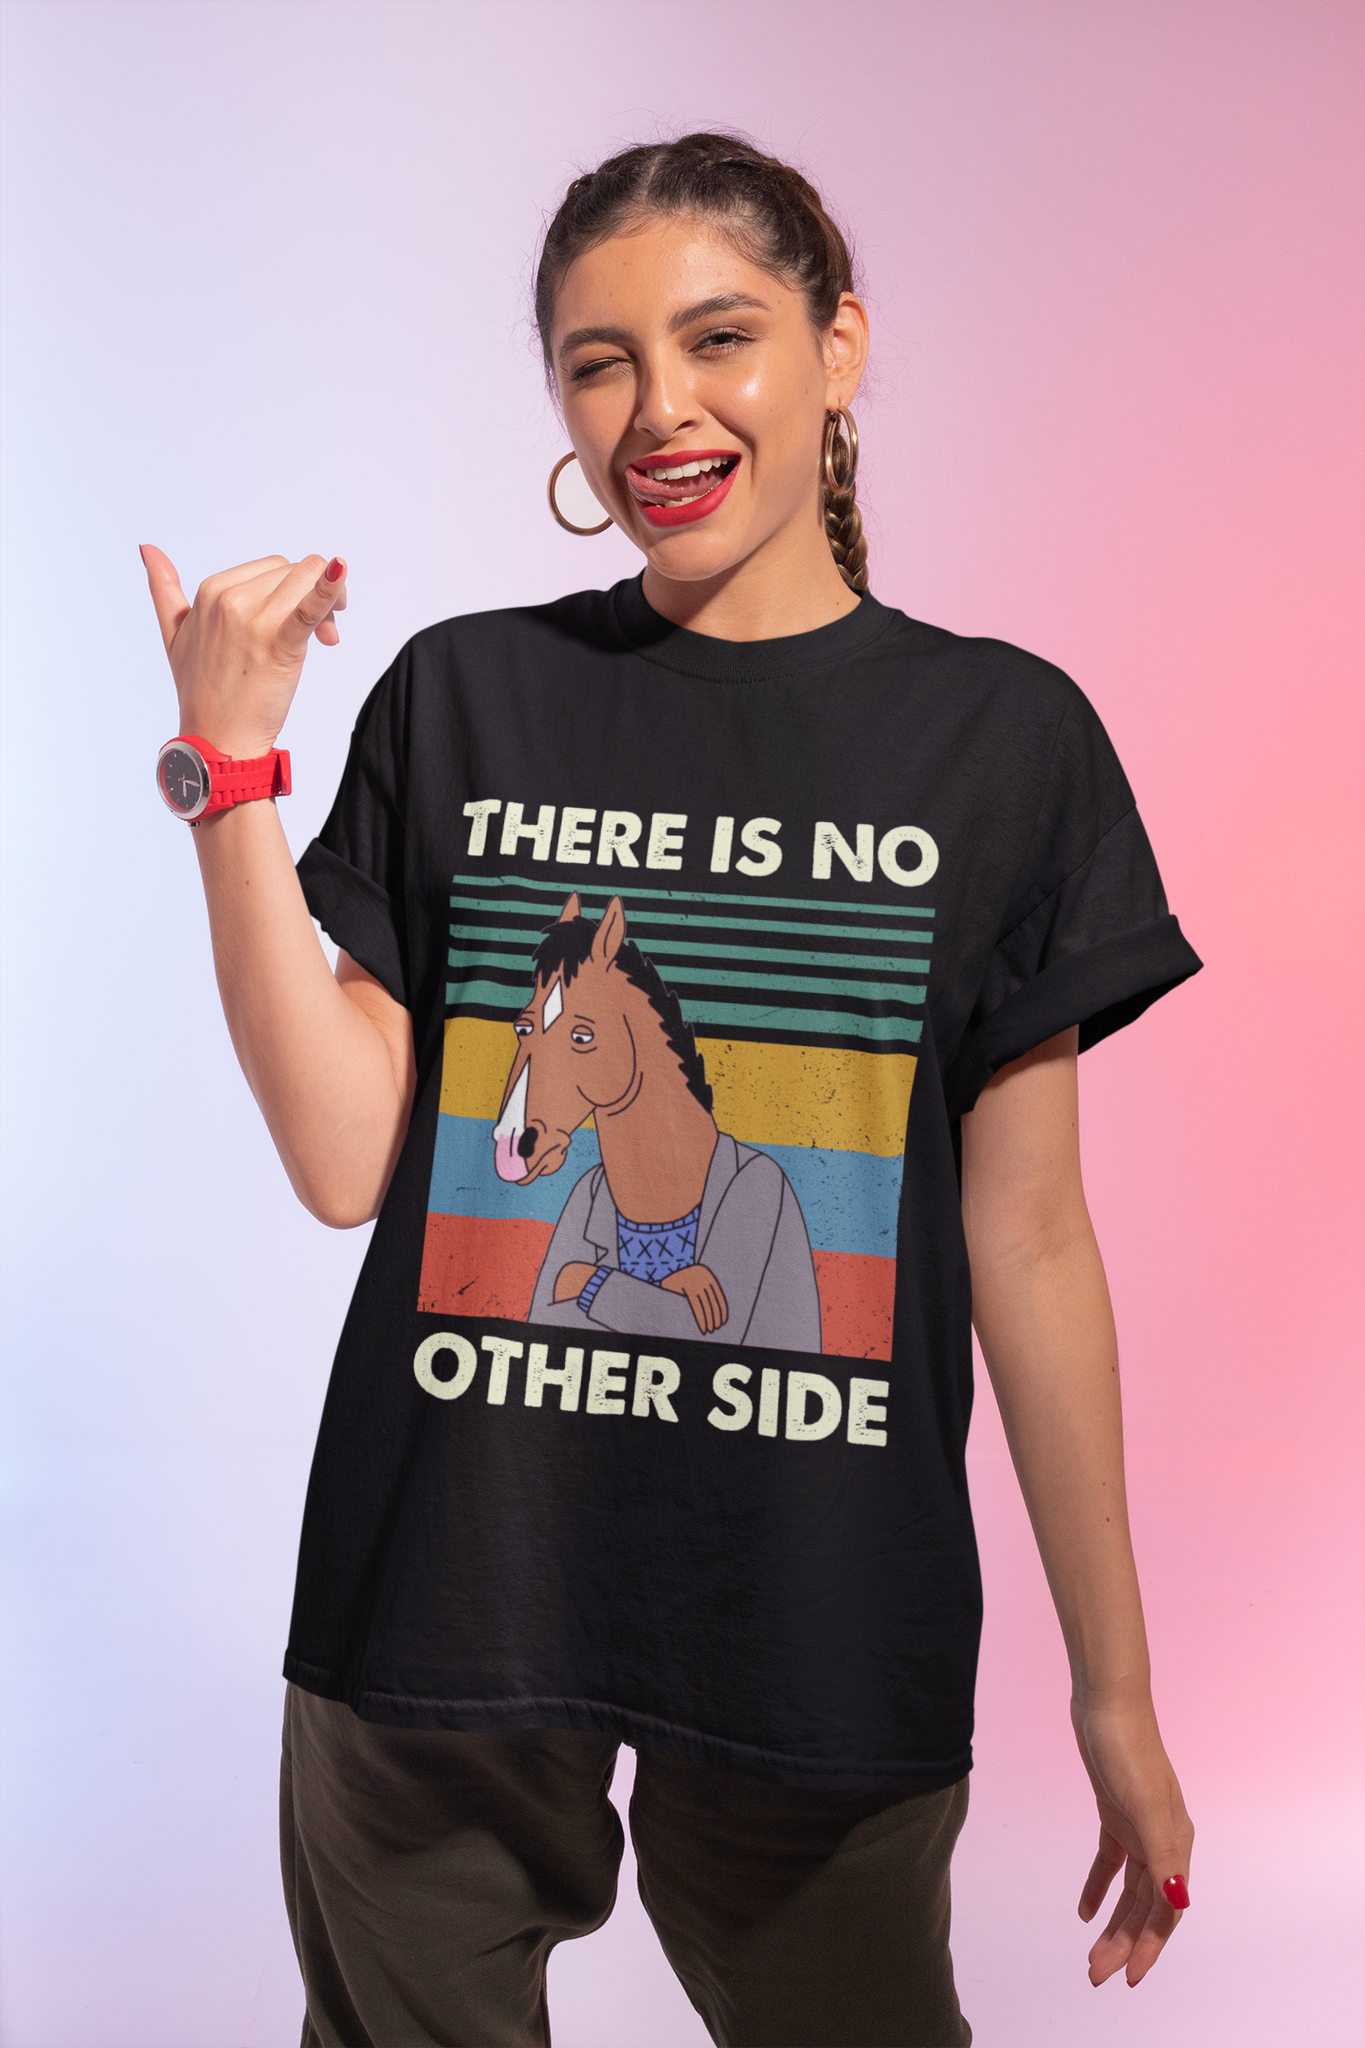 Bojack Horseman Vintage T Shirt, There Is No Other Side Tshirt